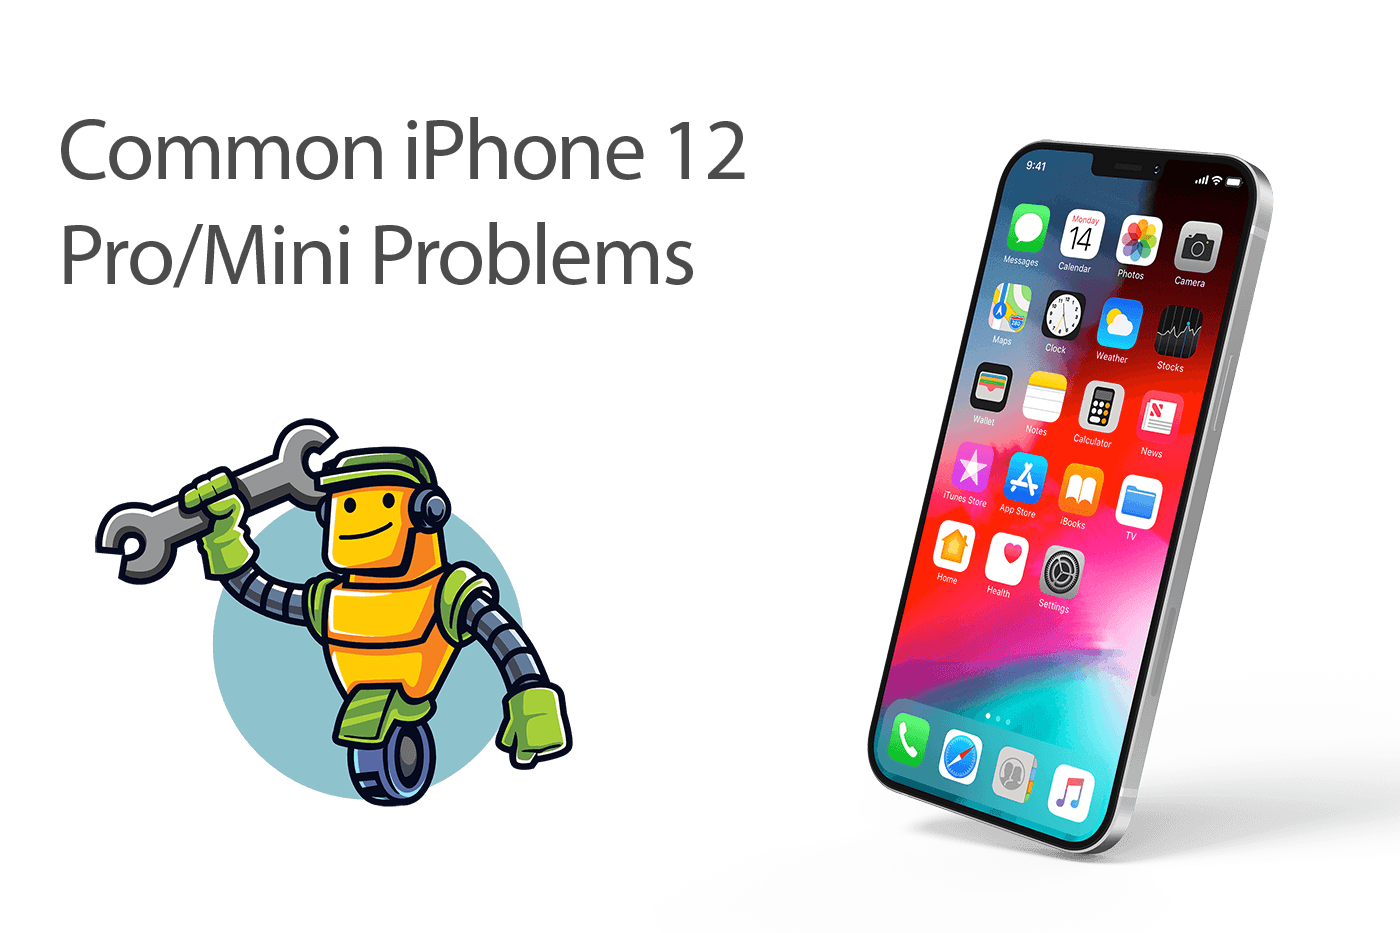 Common iPhone 12 Pro/Mini Problems and Fixes